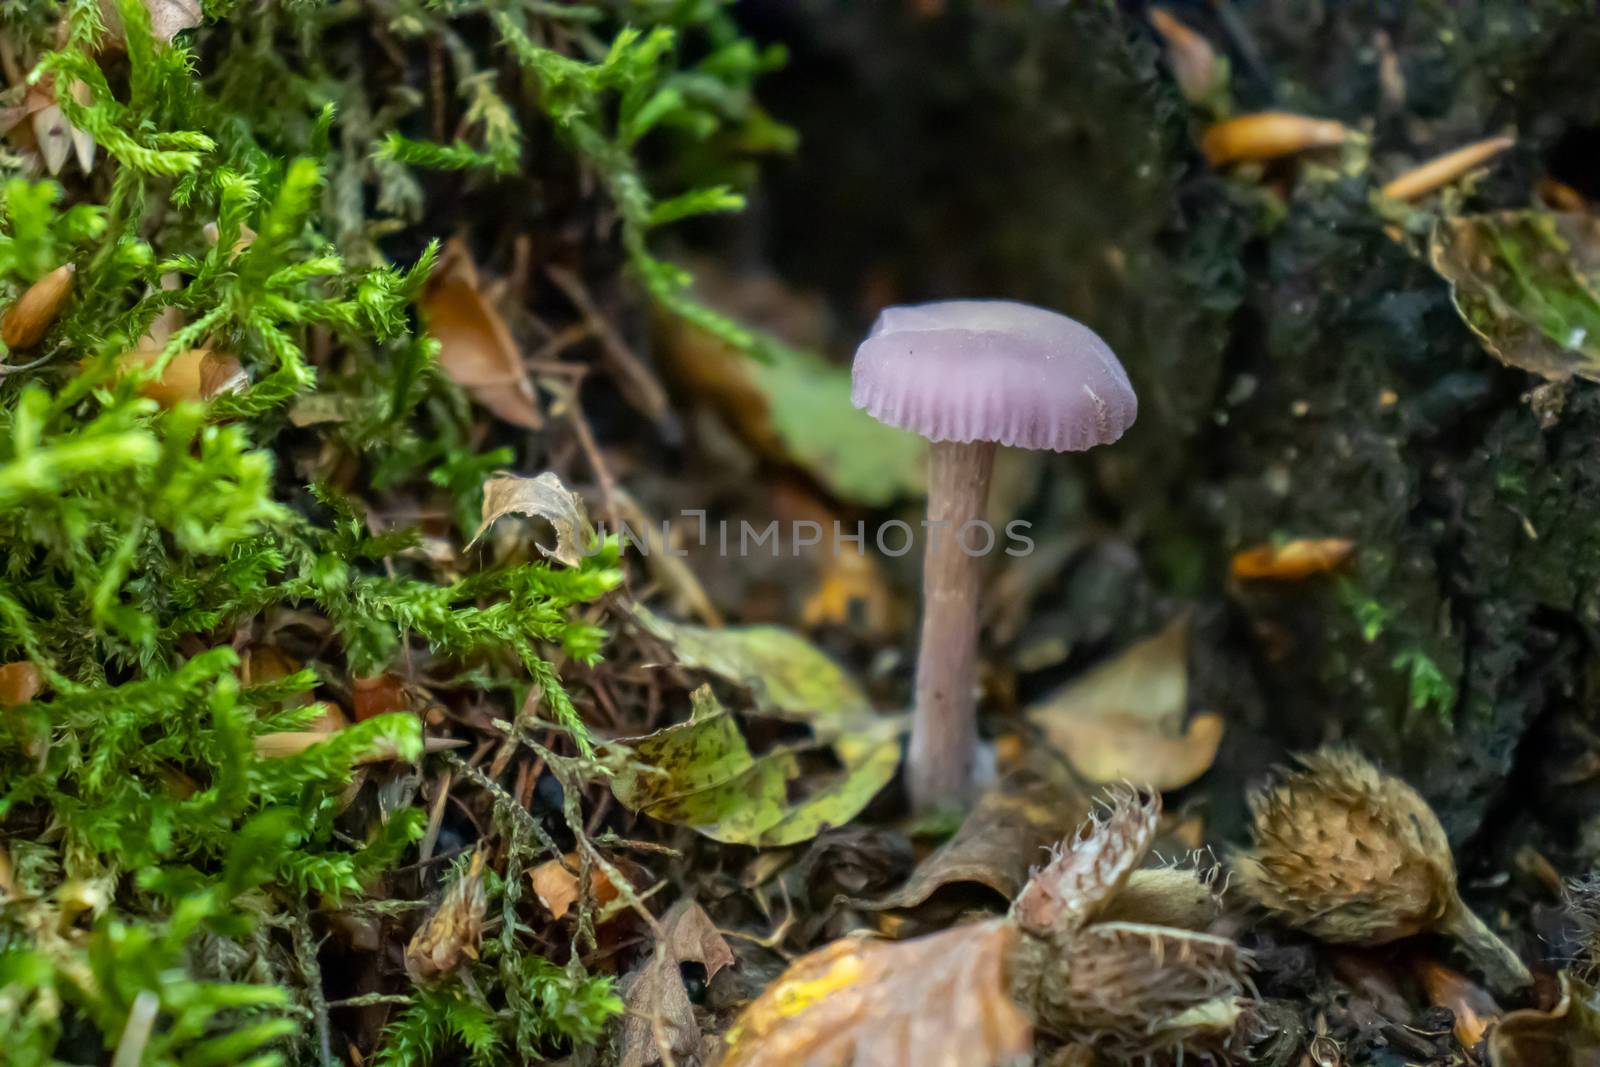 violet mushroom close up coming out among the leaves, moss and branches in the mountains among the trees